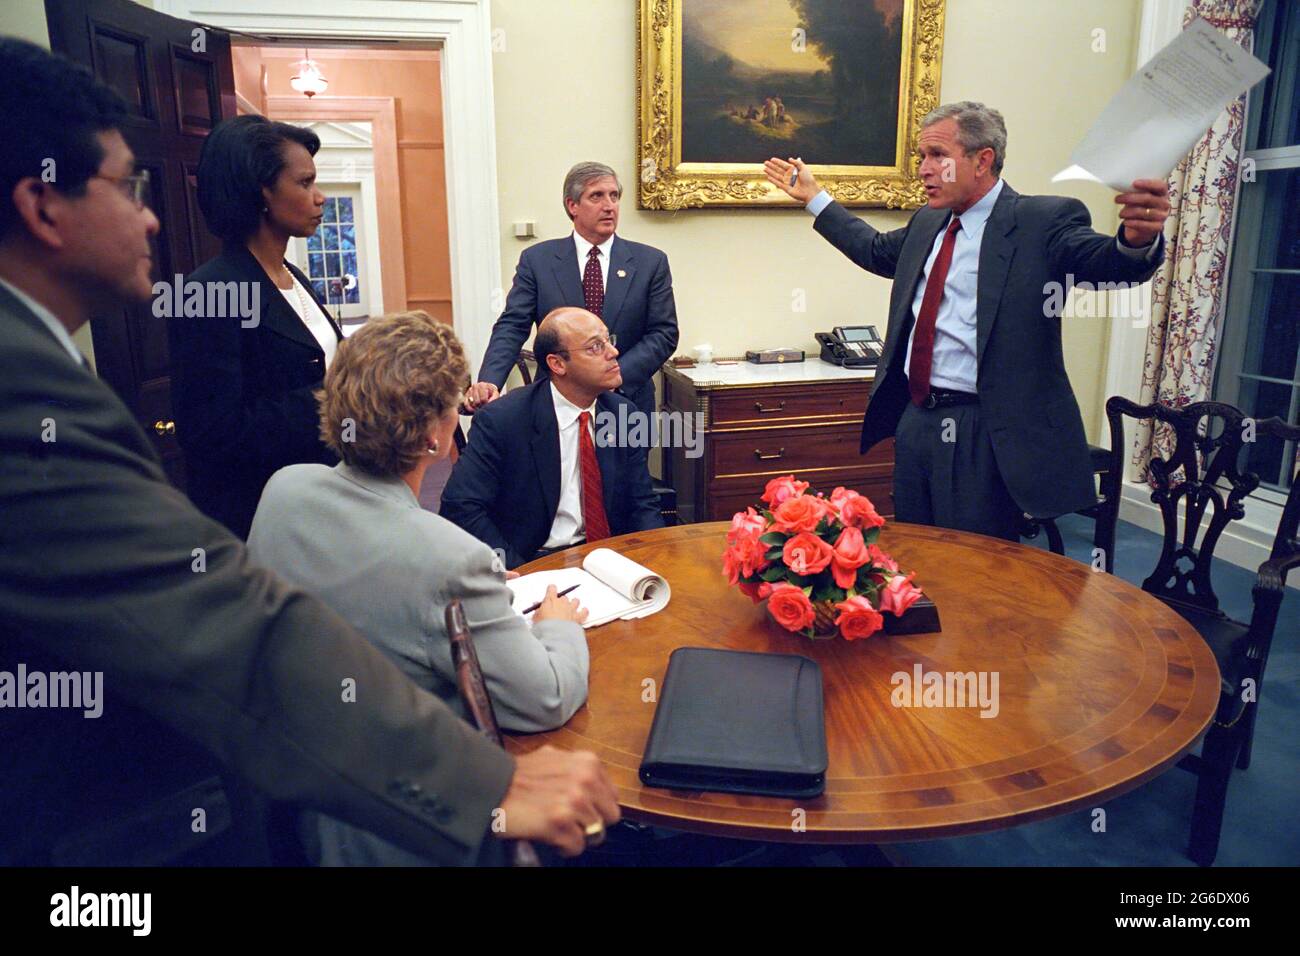 Working with his senior staff, President George W. Bush reviews the speech that he will deliver to the nation the evening of Tuesday, Sept. 11, 2001, from the Oval Office. Pictured from left are: Alberto Gonzales, White House Counsel; Condoleezza Rice, National Security Adviser; Karen Hughes, Counselor; Ari Fleischer, Press Secretary, and Andy Card, Chief of Staff.  Photo by Paul Morse, Courtesy of the George W. Bush Presidential Library Stock Photo